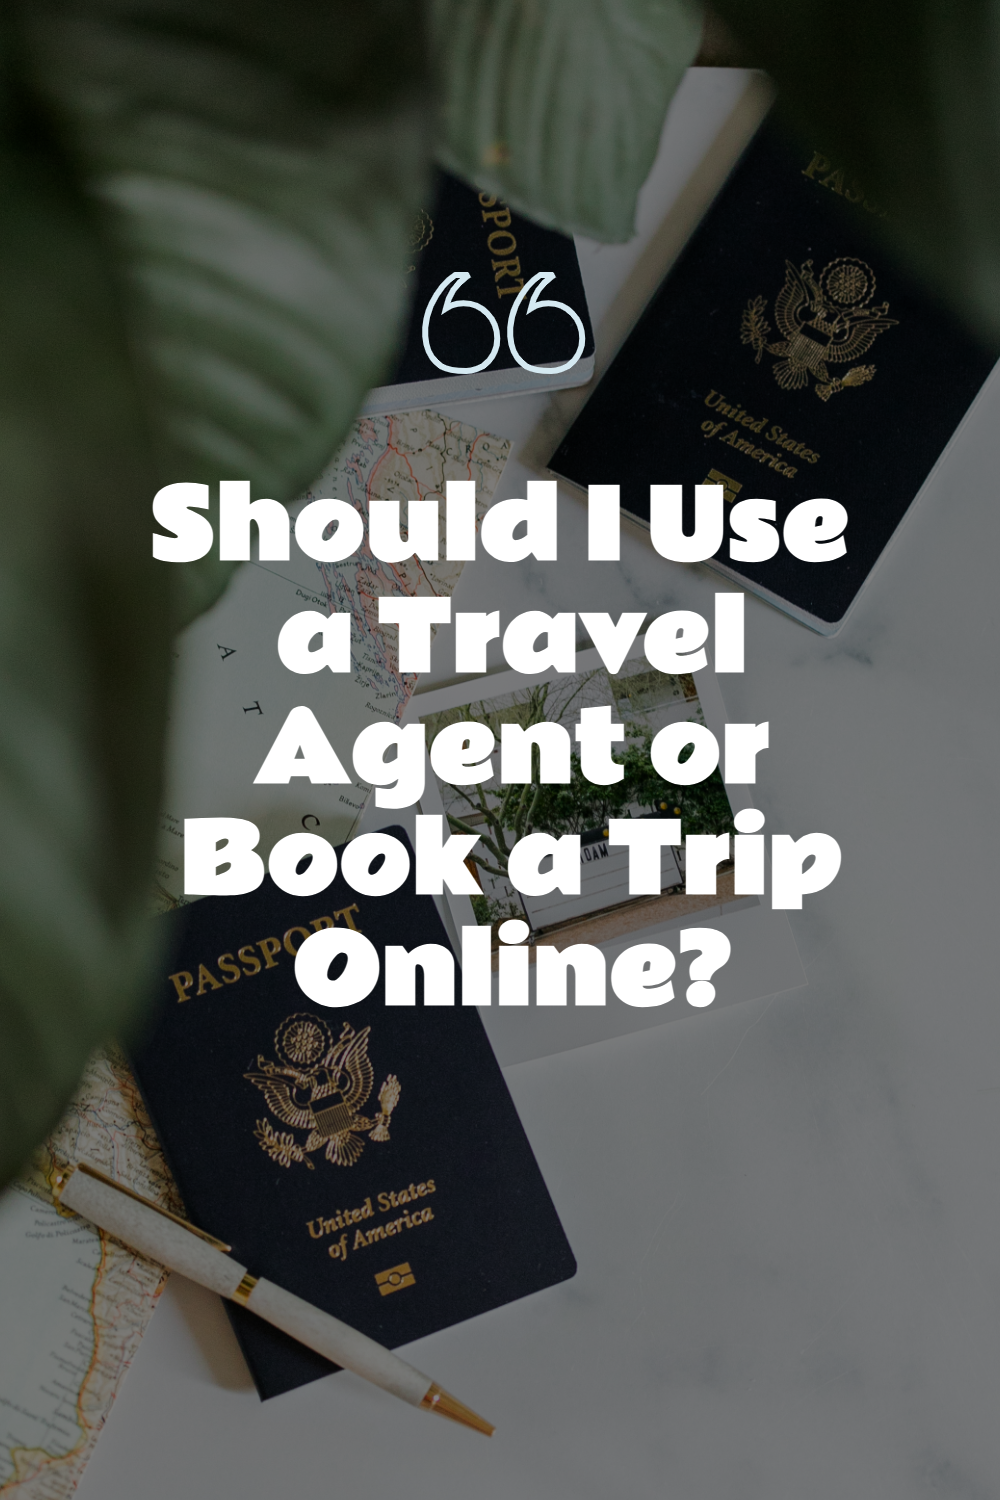 Looking down on a table with passports, a map, and plants and thinking "Should you use a travel agent or book your trip online?"